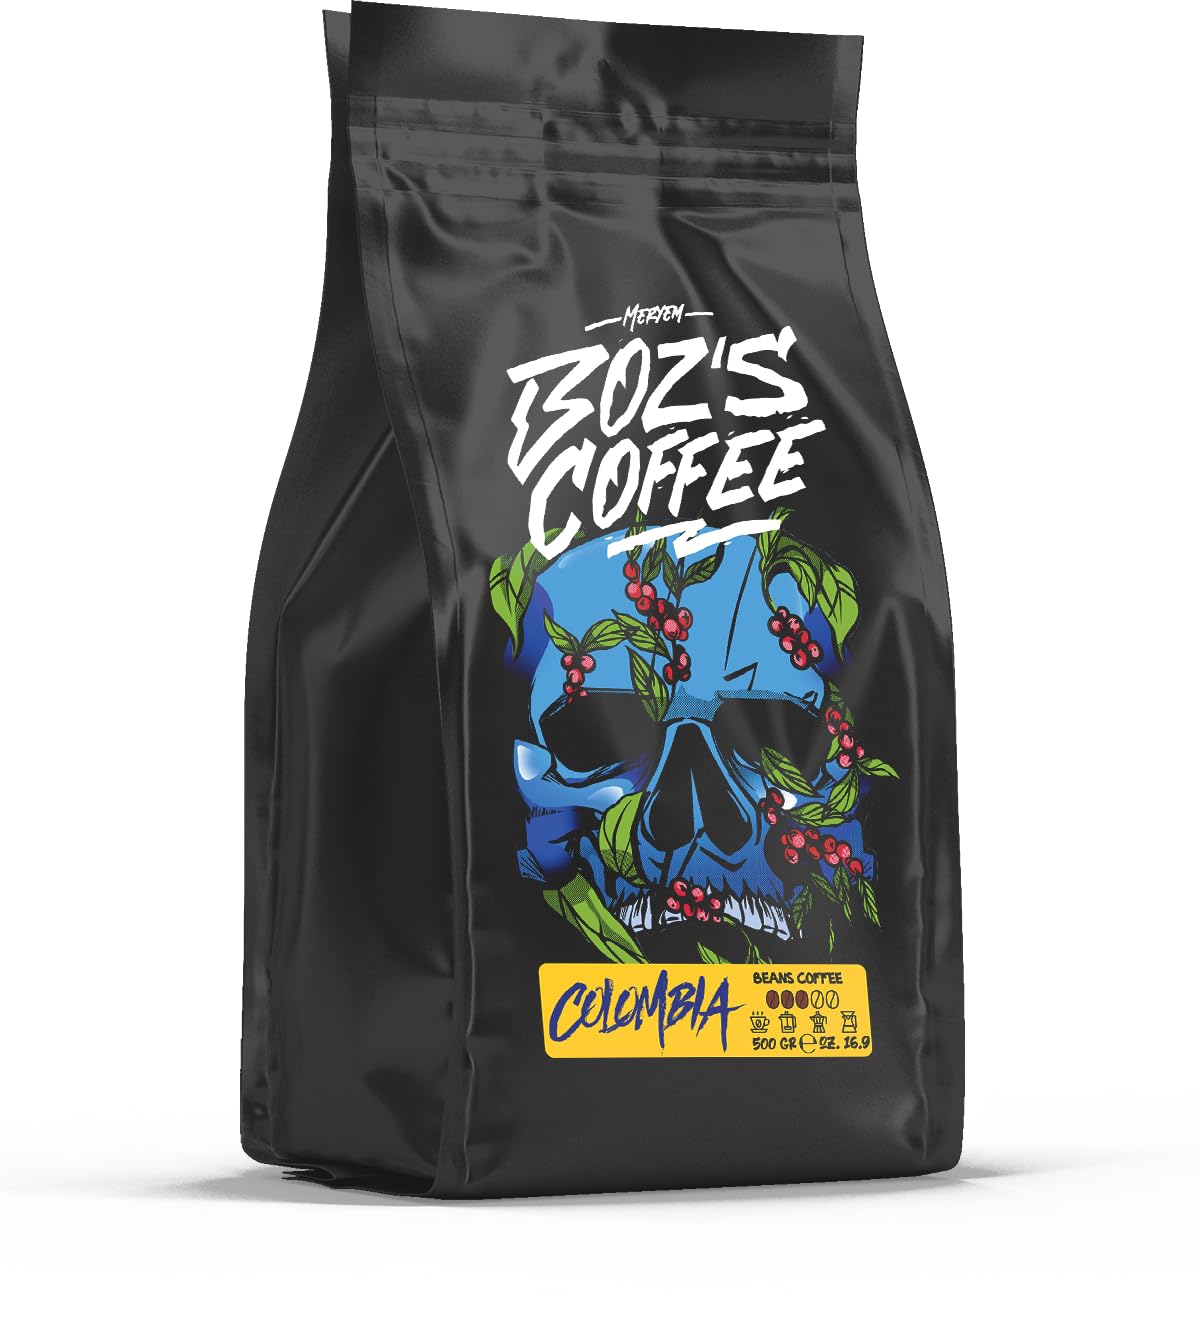 Meryem Boz's Coffee Colombia Coffee Beans 500 g | Selected Arabica Beans from Colombia | Whole Roasted Coffee Beans for Fully Automatic Machine & Portafilter | Intensity 3 out of 5 | Sports Coffee